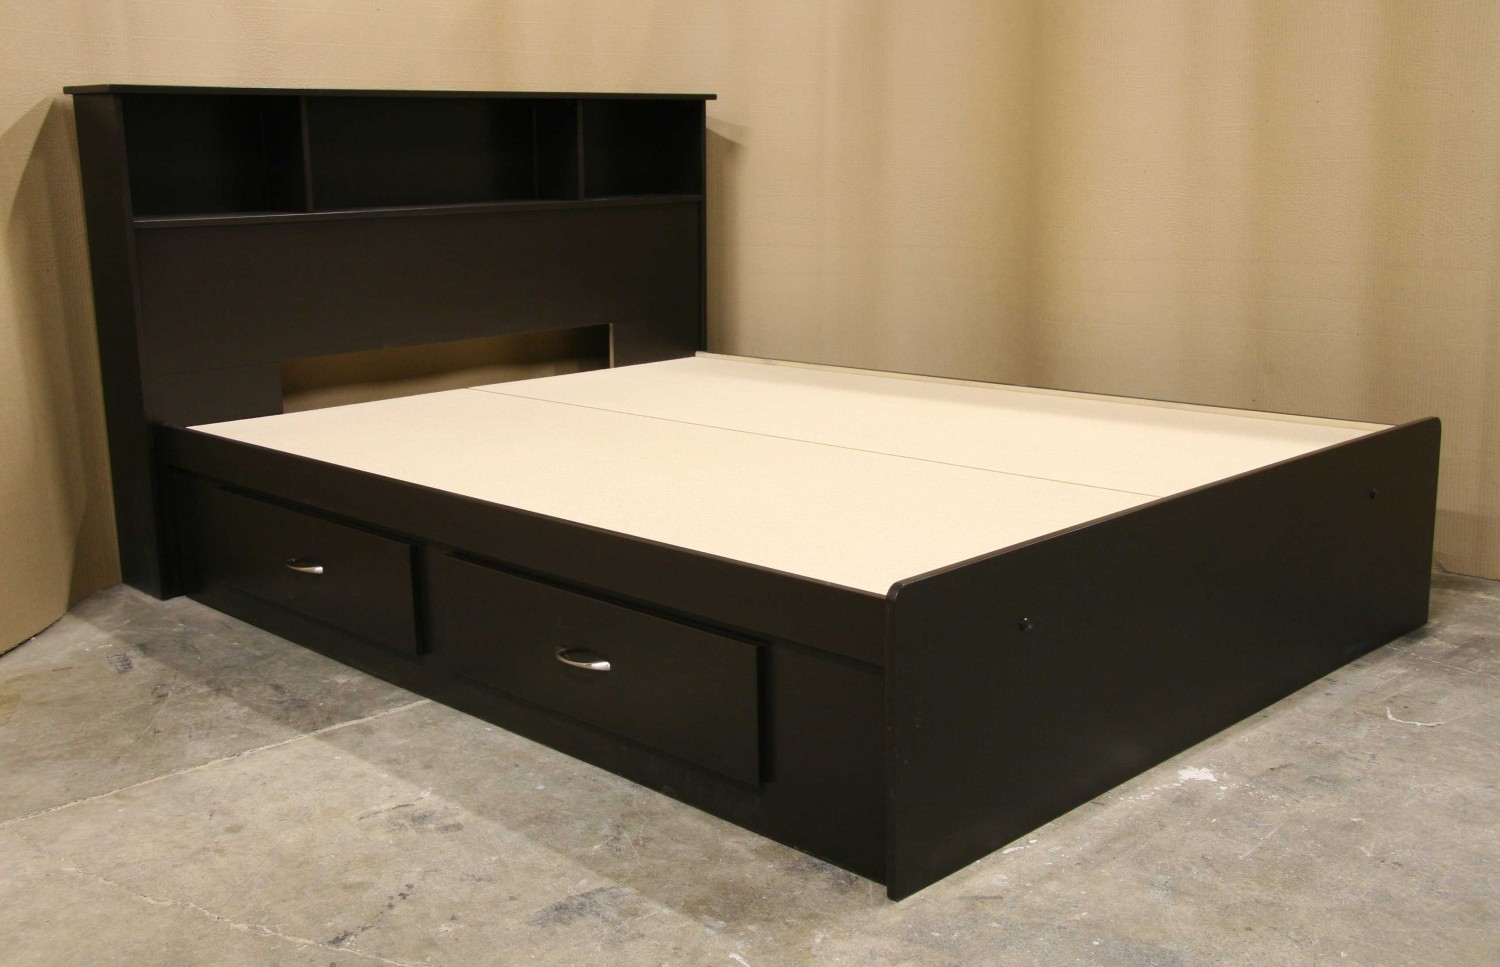 queen size bed frame with drawers underneath full size of winsome queen frame with drawers black wooden FQOJOMN